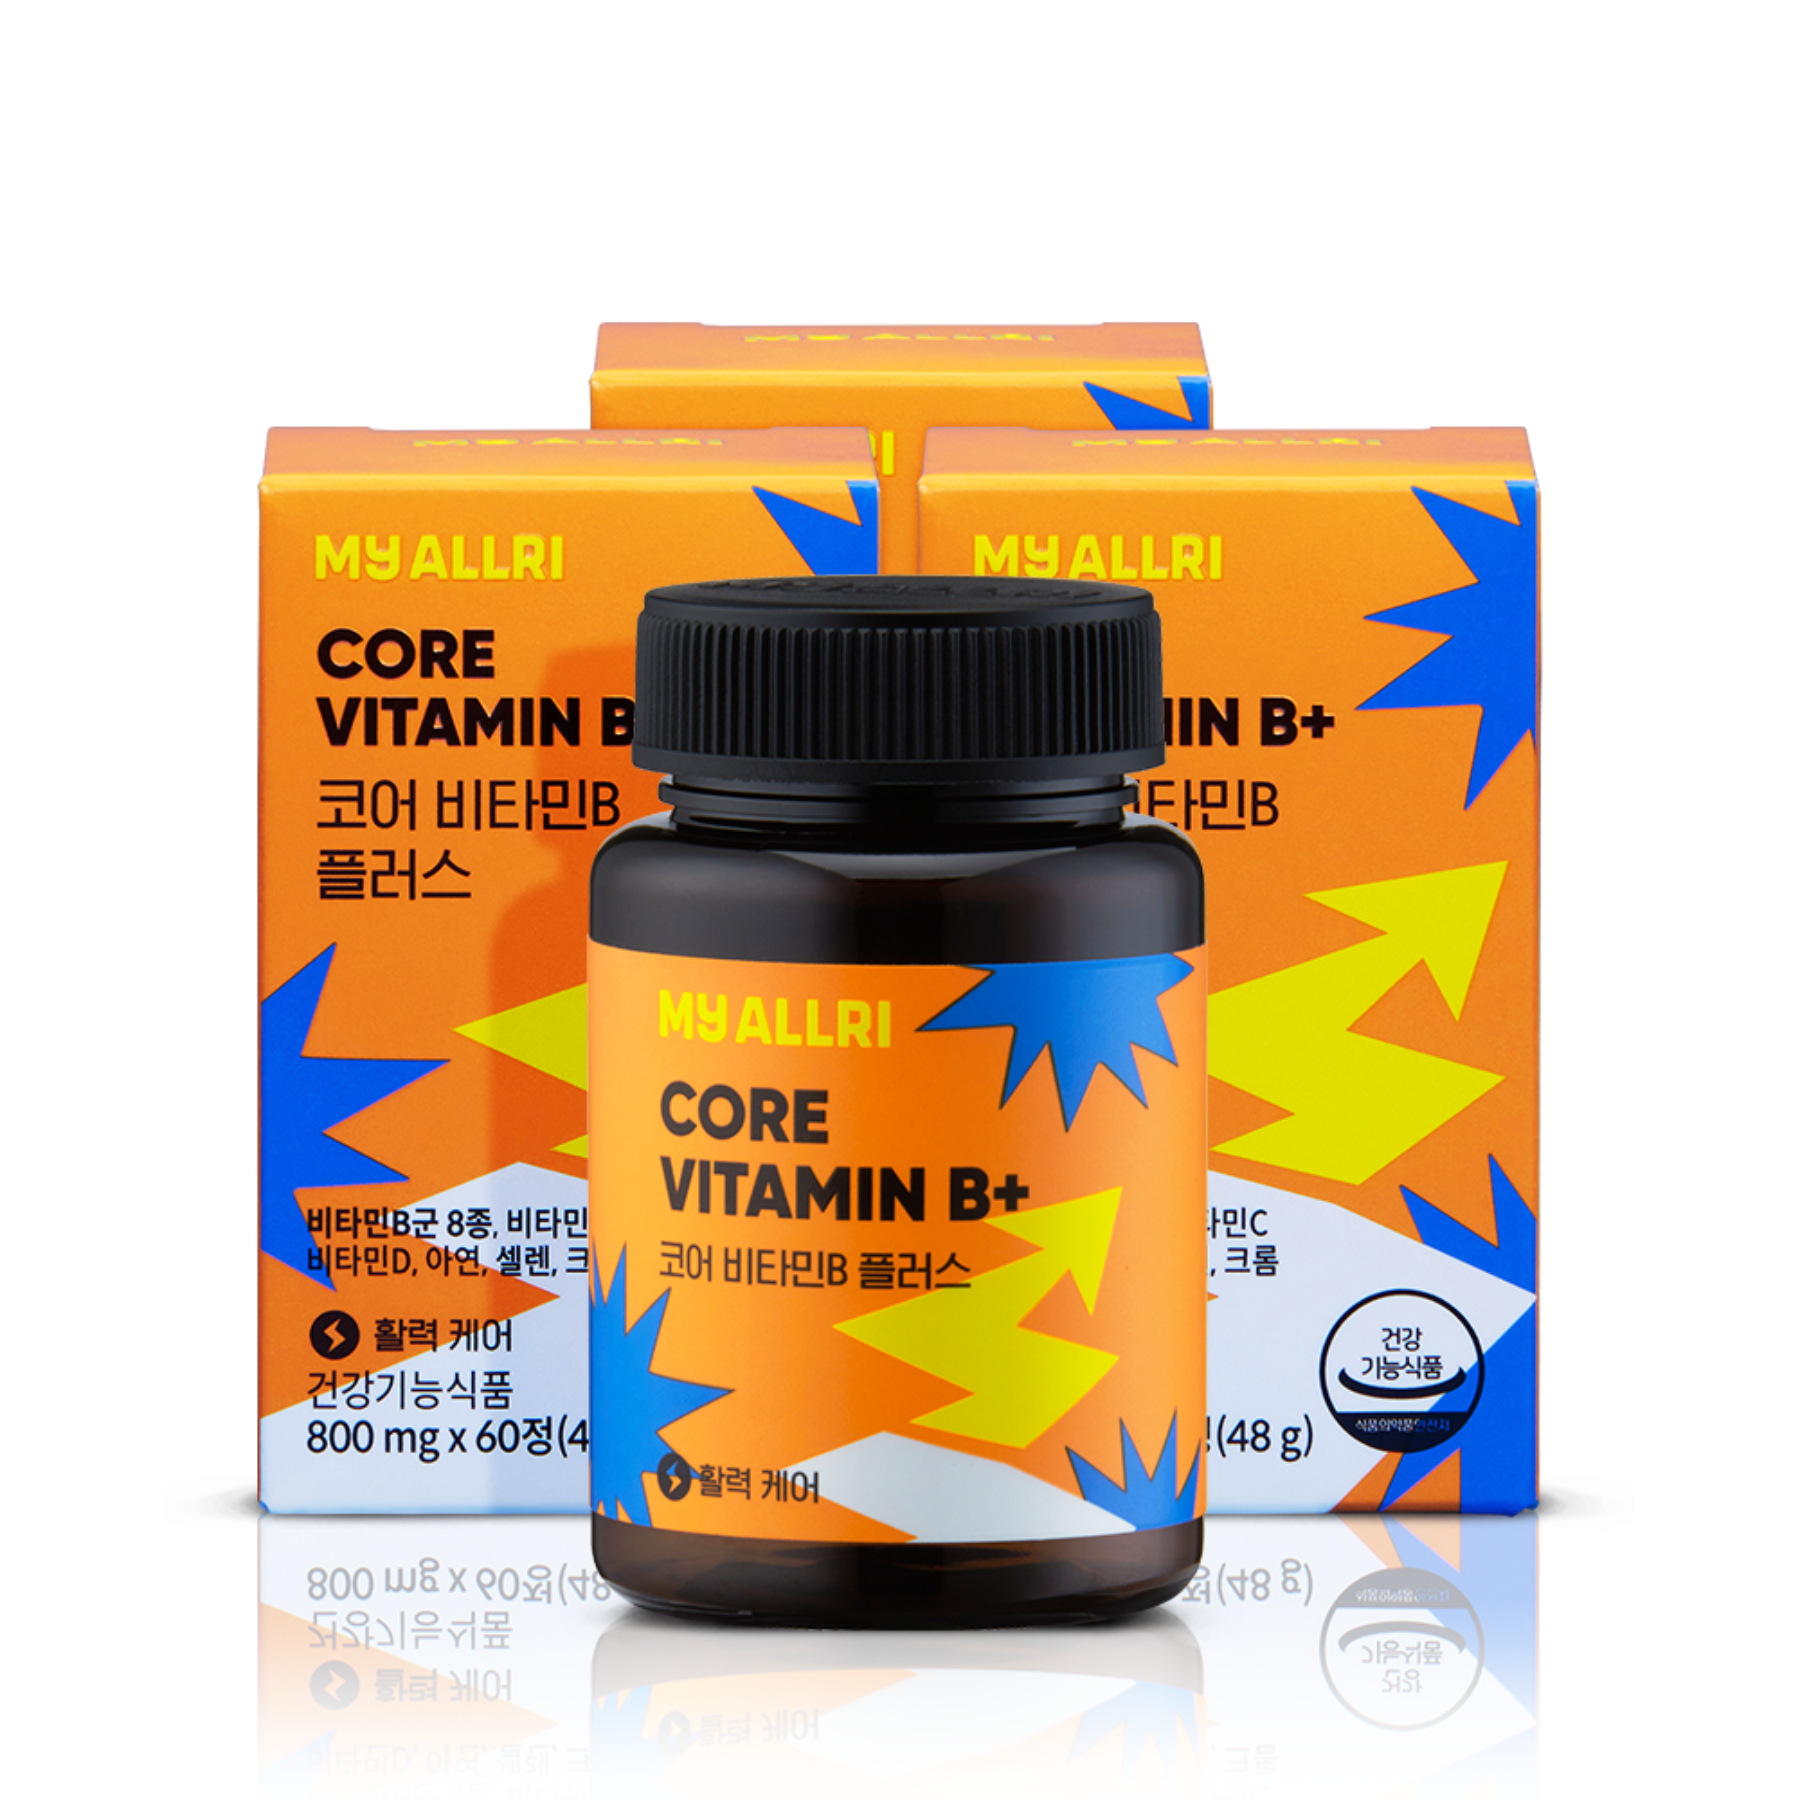 ★33%★ Core Vitamin B Plus 3 packs for 6 months